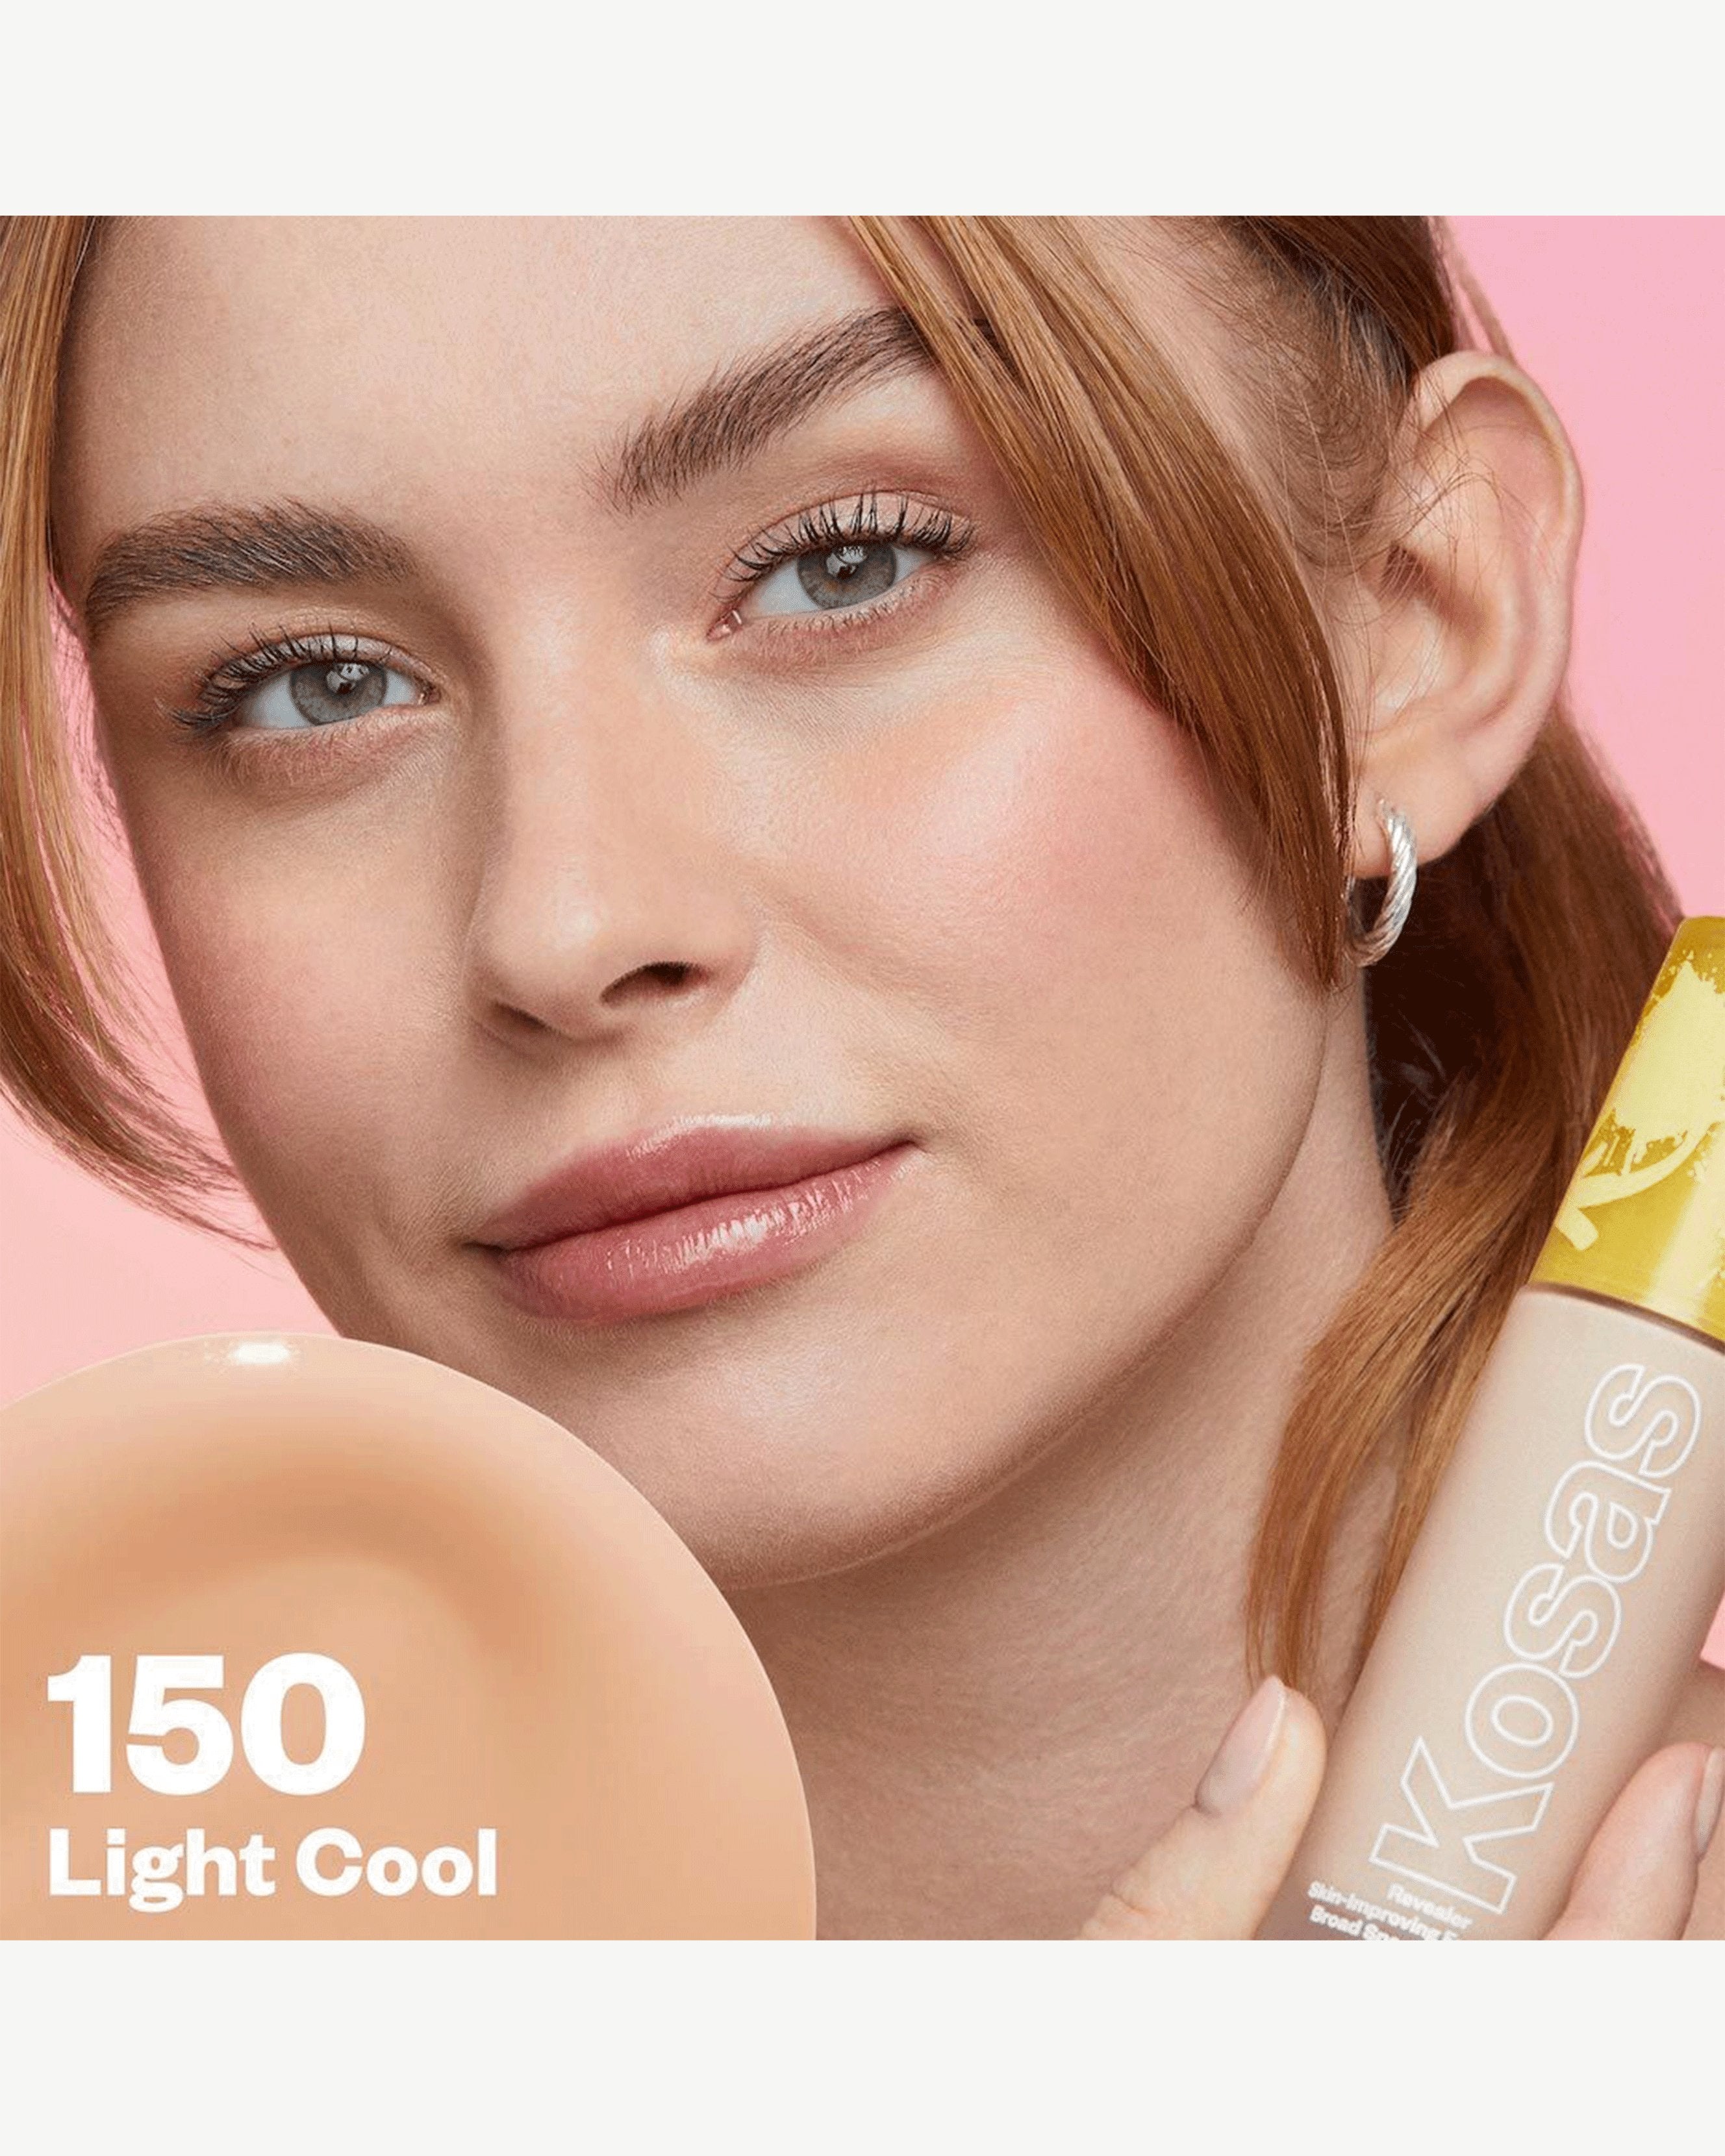 Light Cool 150 (light with cool pink undertones)